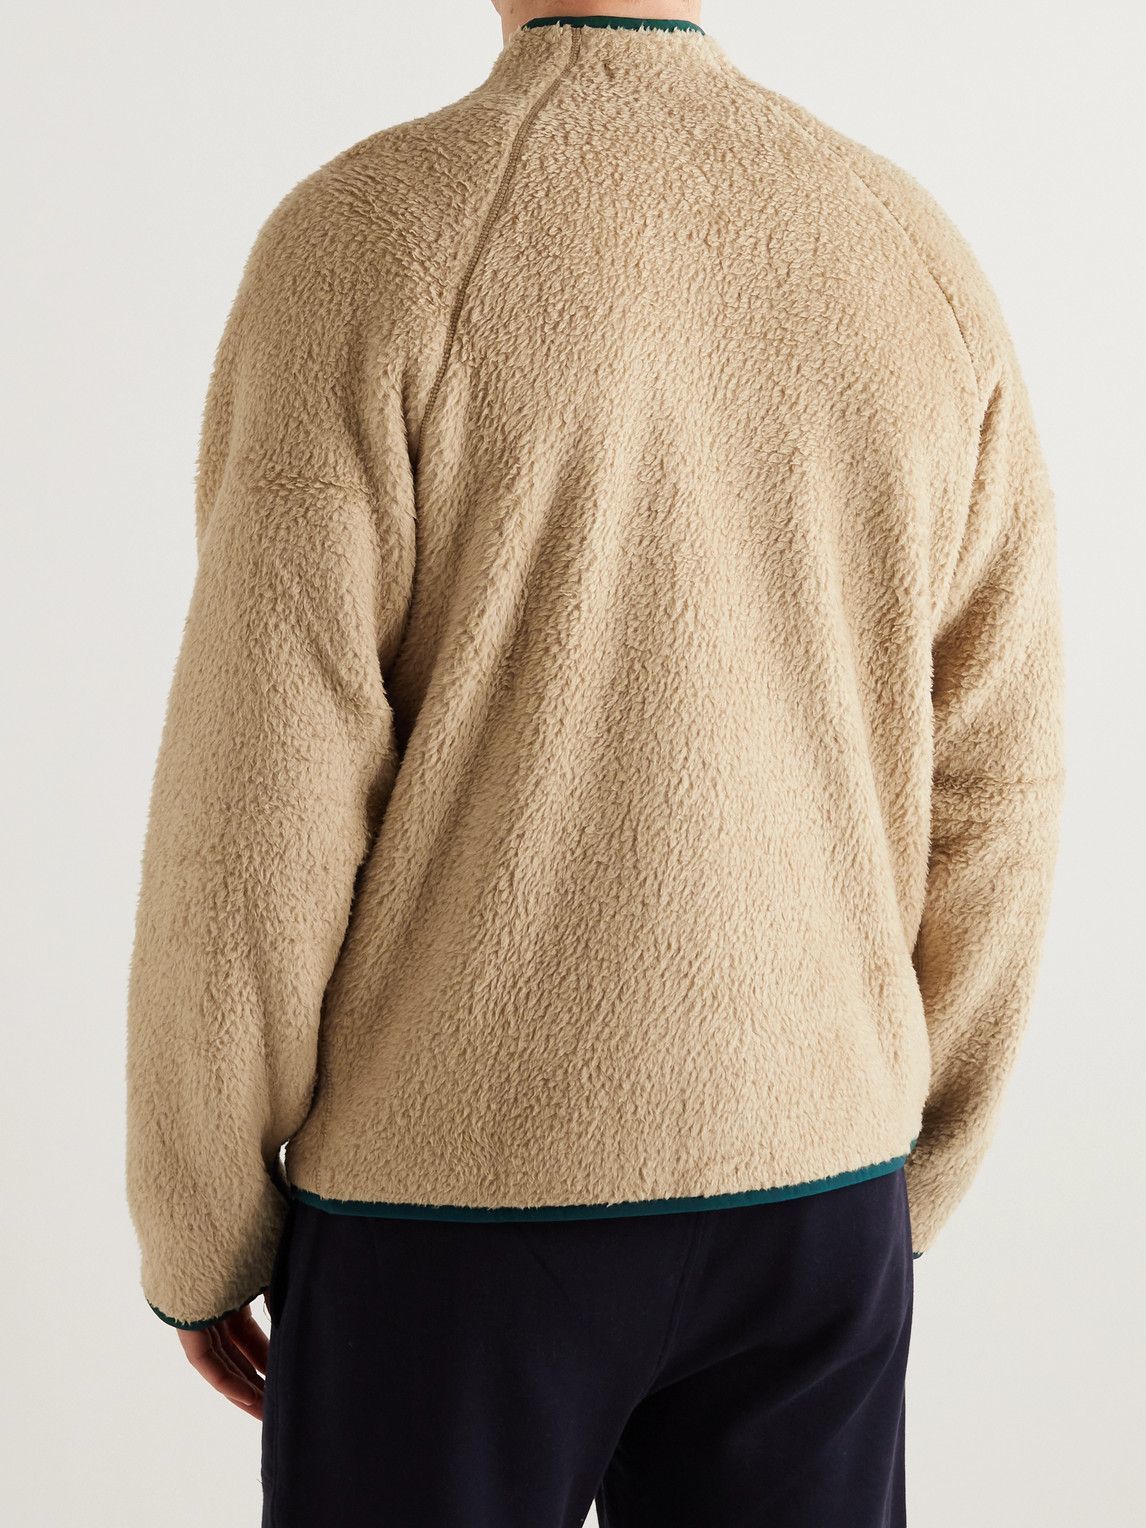 Outerknown - Skyline Recycled Fleece and ECONYL Jacket - Neutrals ...